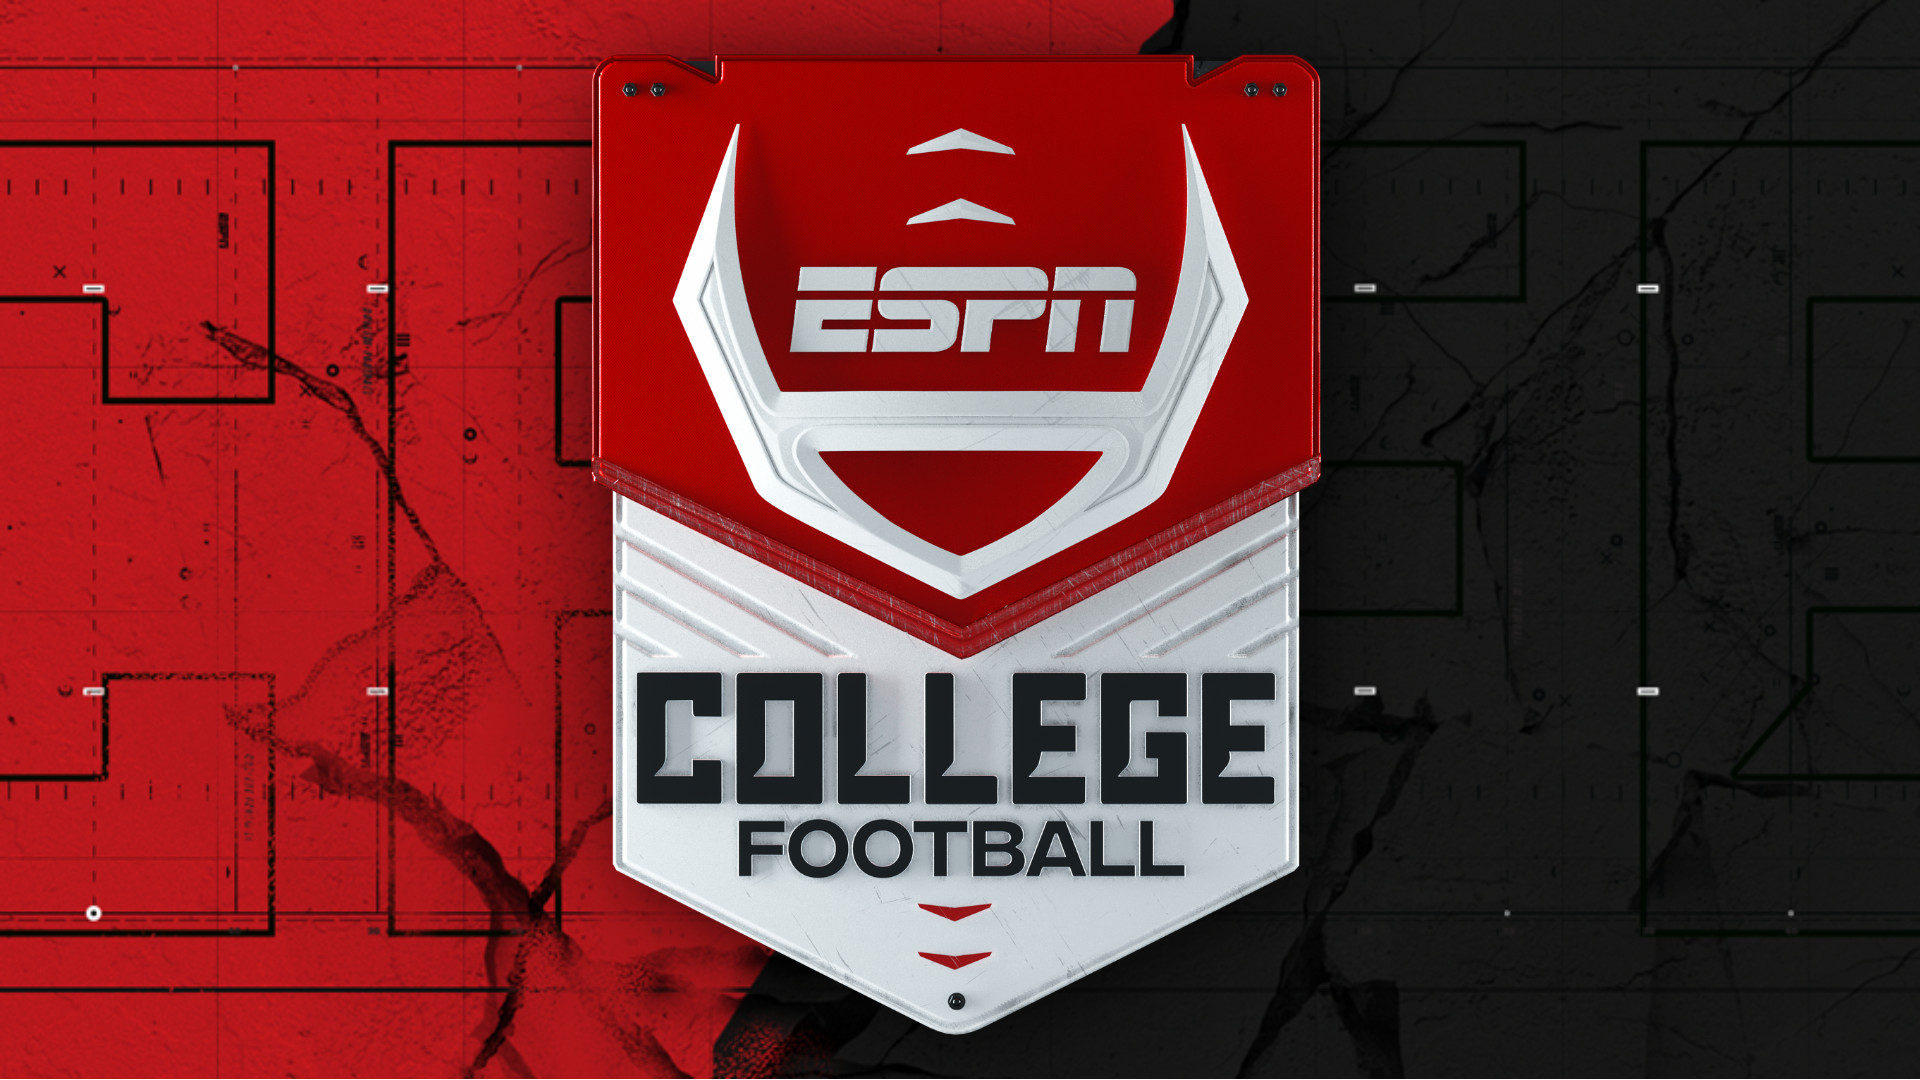 Premier College Football : A 70-game slate is set for Week 1, August 29 through Labor Day Monday